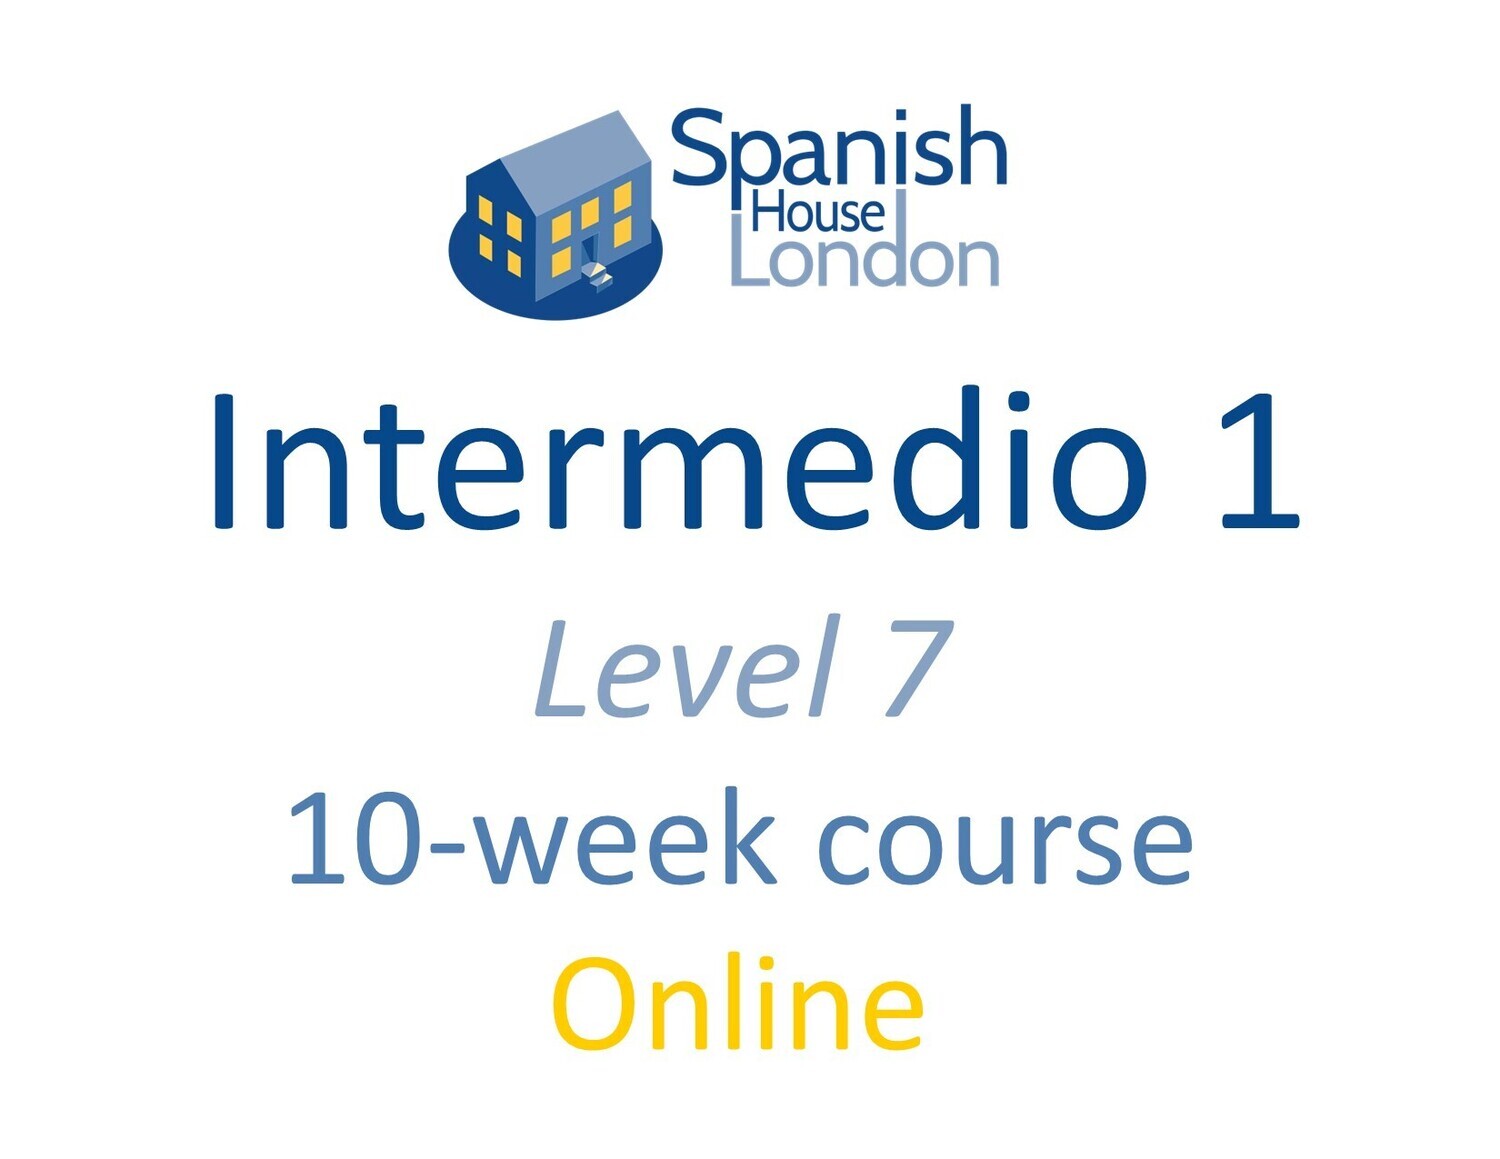 Intermedio 1 Course starting on 3rd October at 6pm